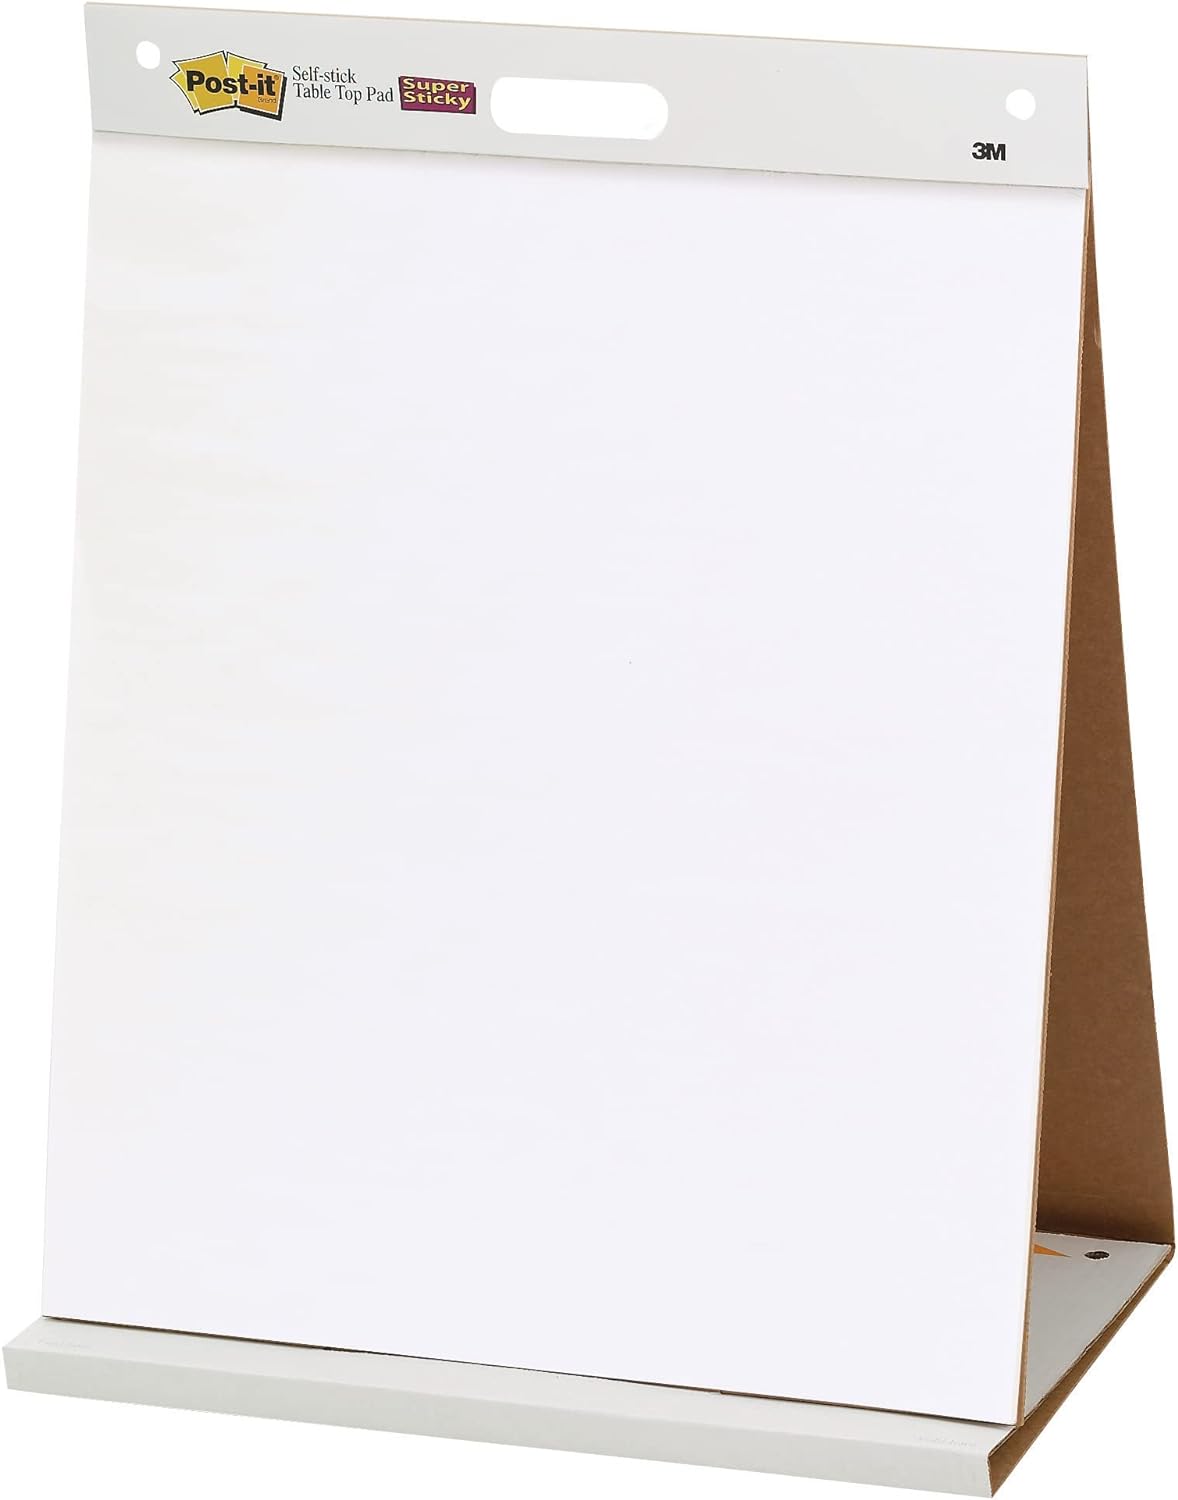 Post-it Super Sticky Tabletop Easel Pad, 20" x 23", White Pad Of 20 Sheets (MMM 563R)